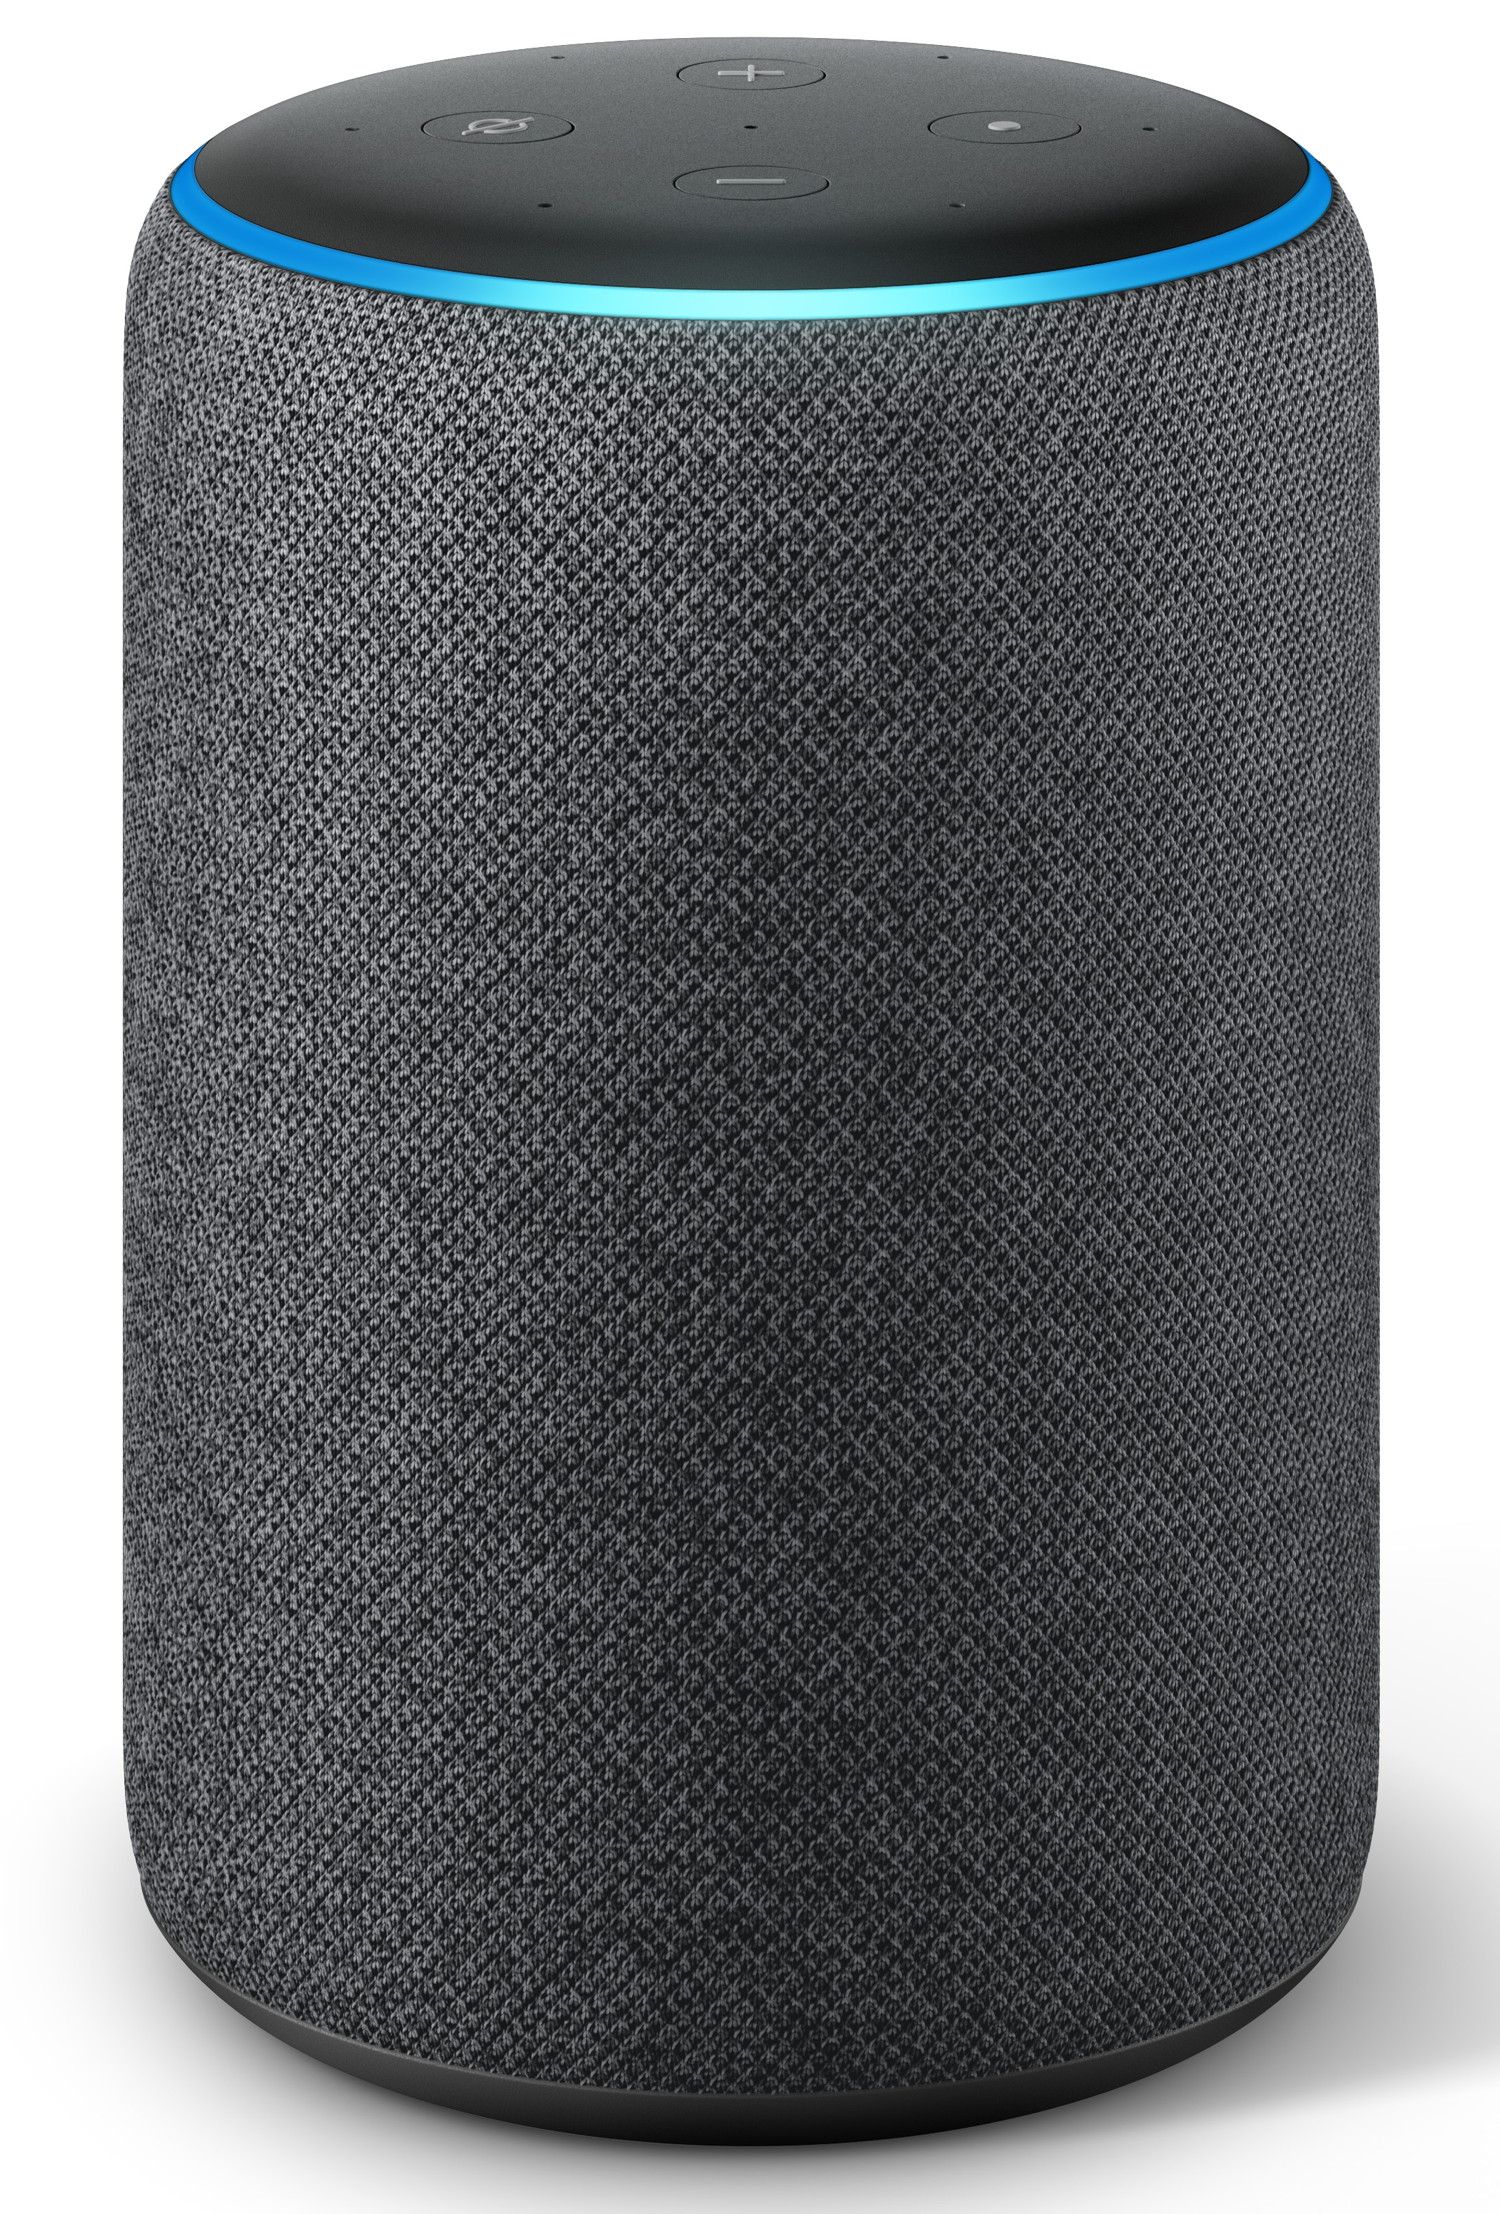 Figure 28: The Amazon Echo Plus is one of many Alexa-supporting devices. (Source: Amazon)